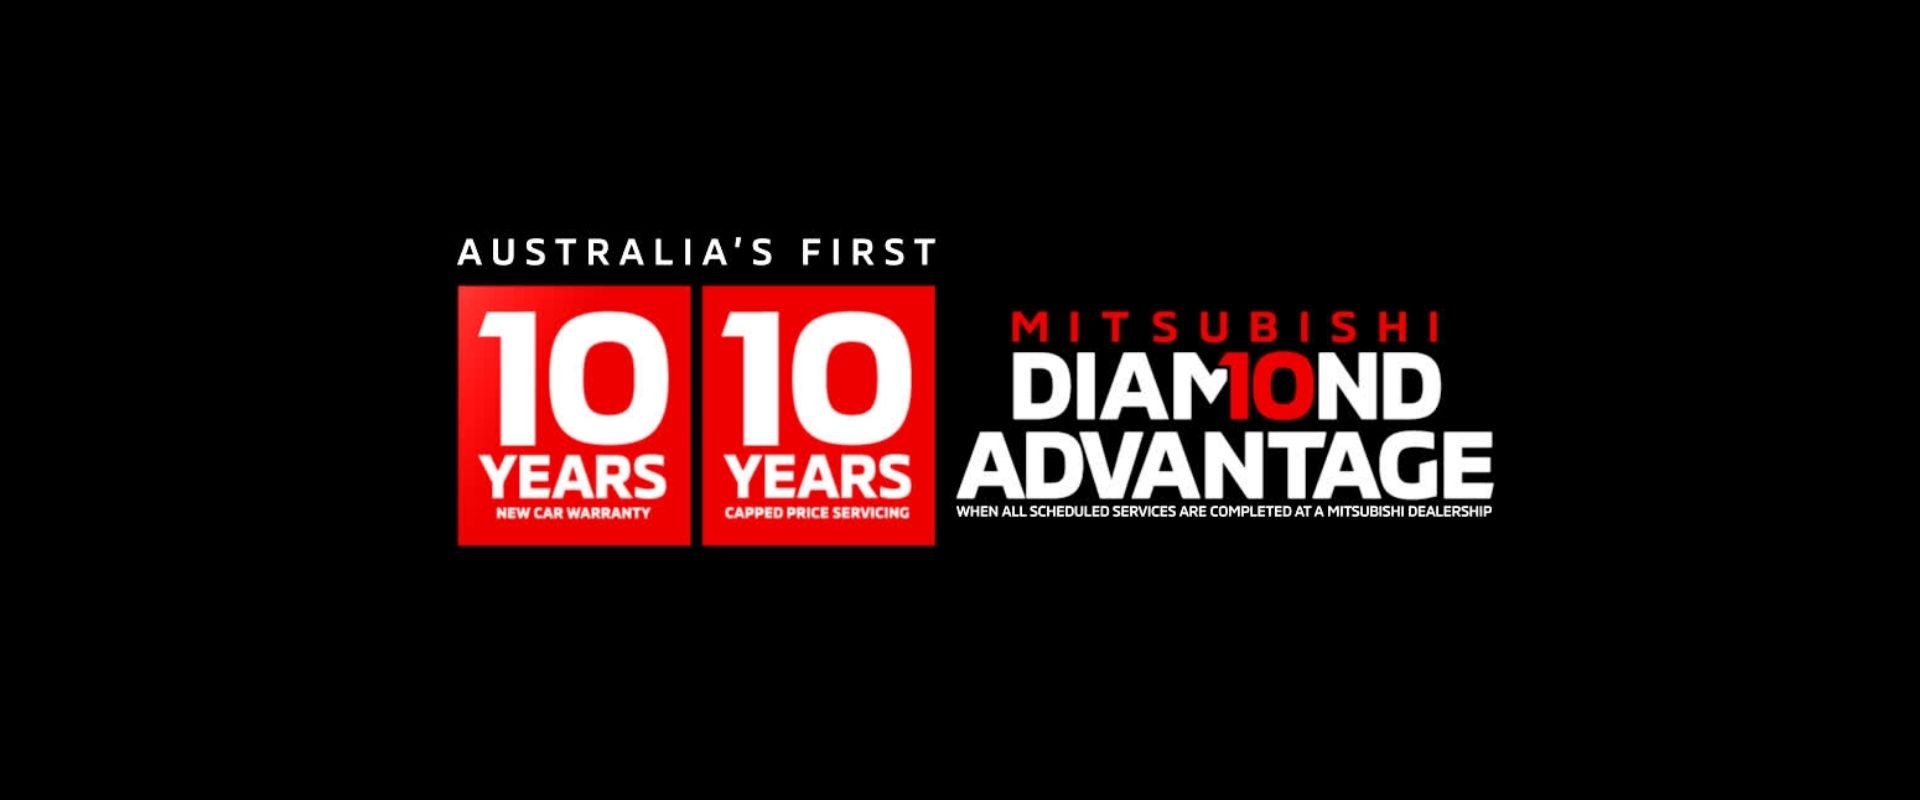 Mitsubishi Offers. Find out more.